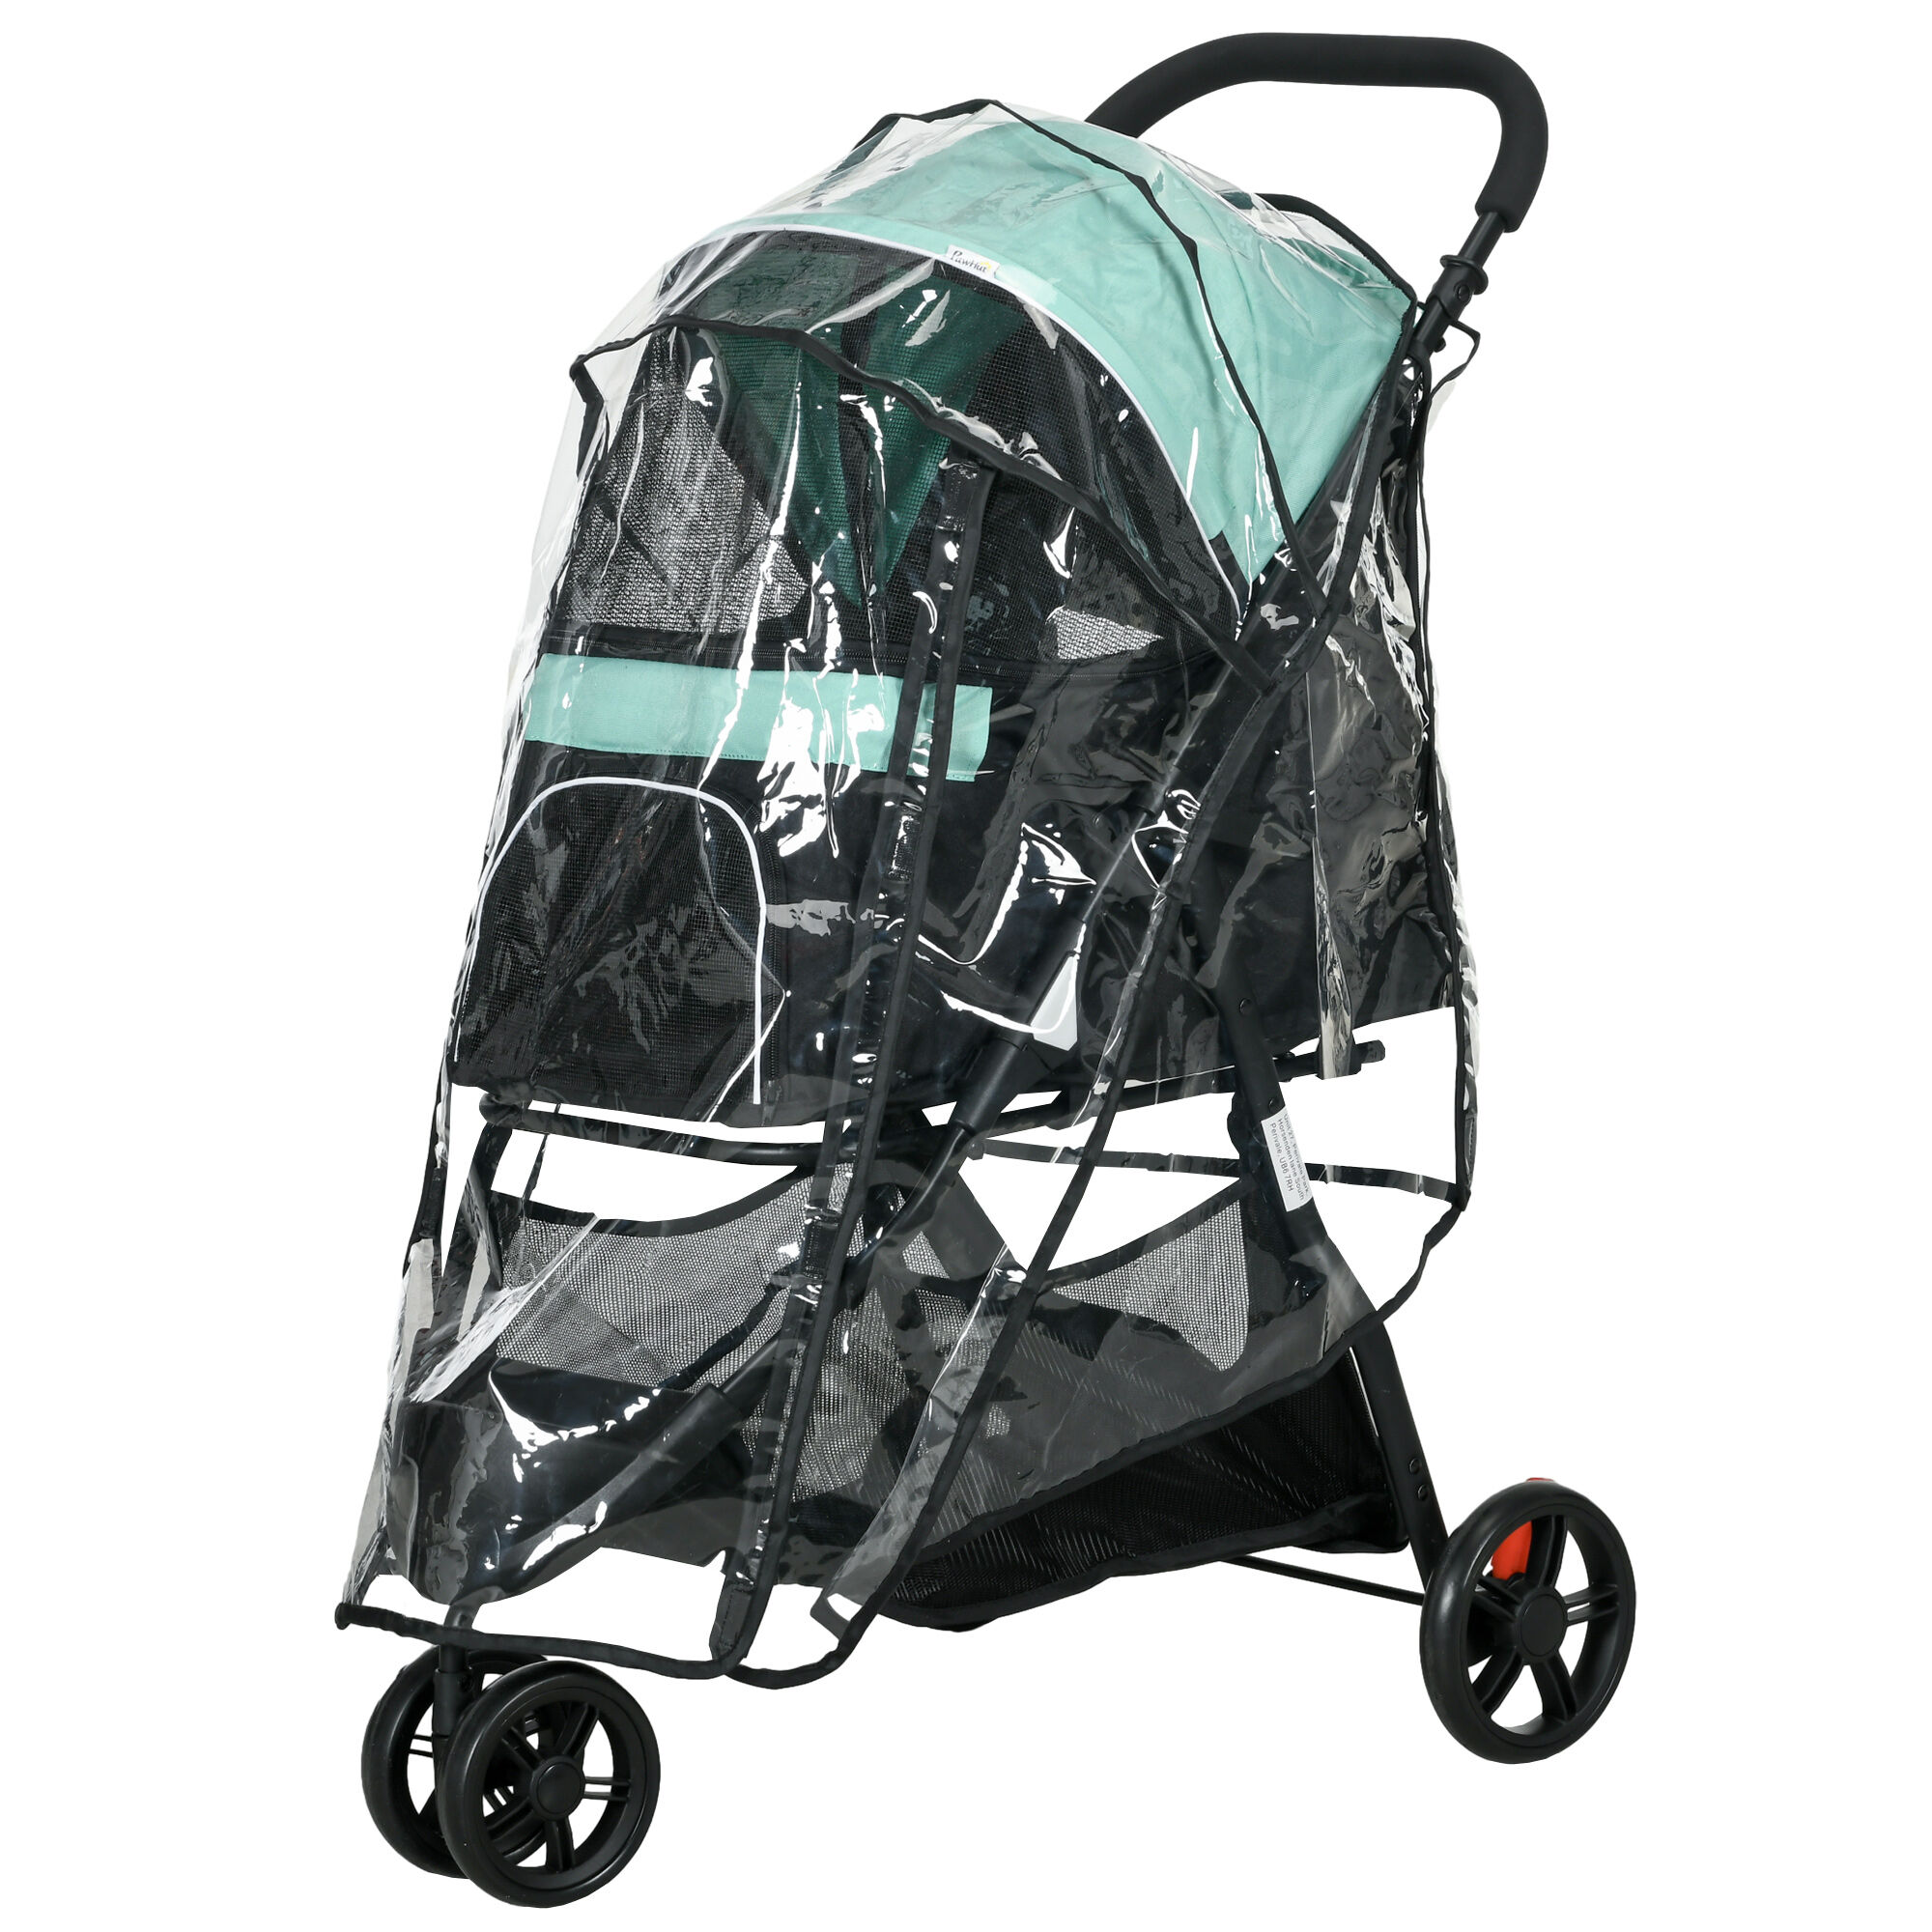 PawHut Lightweight Foldable Pet Stroller with Protective Rain Cover for Extra Small and Small Dogs, Vibrant Green